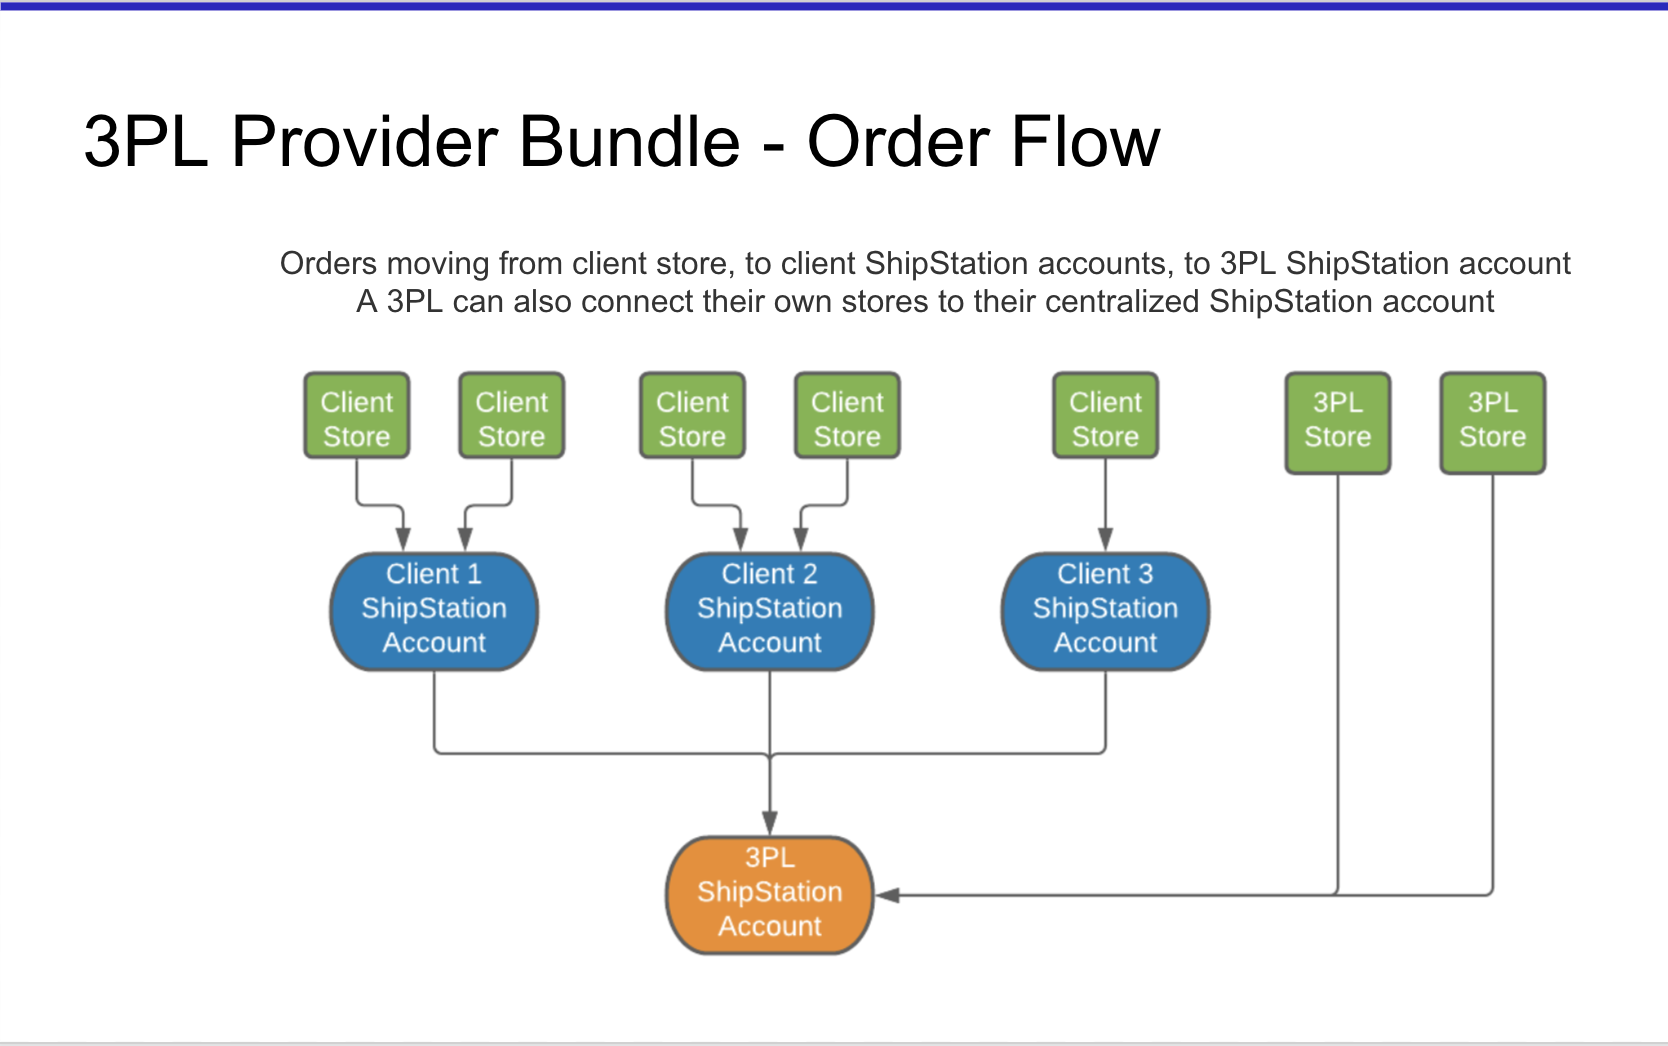 Flow of orders from client stores to ShipStation to 3PL account